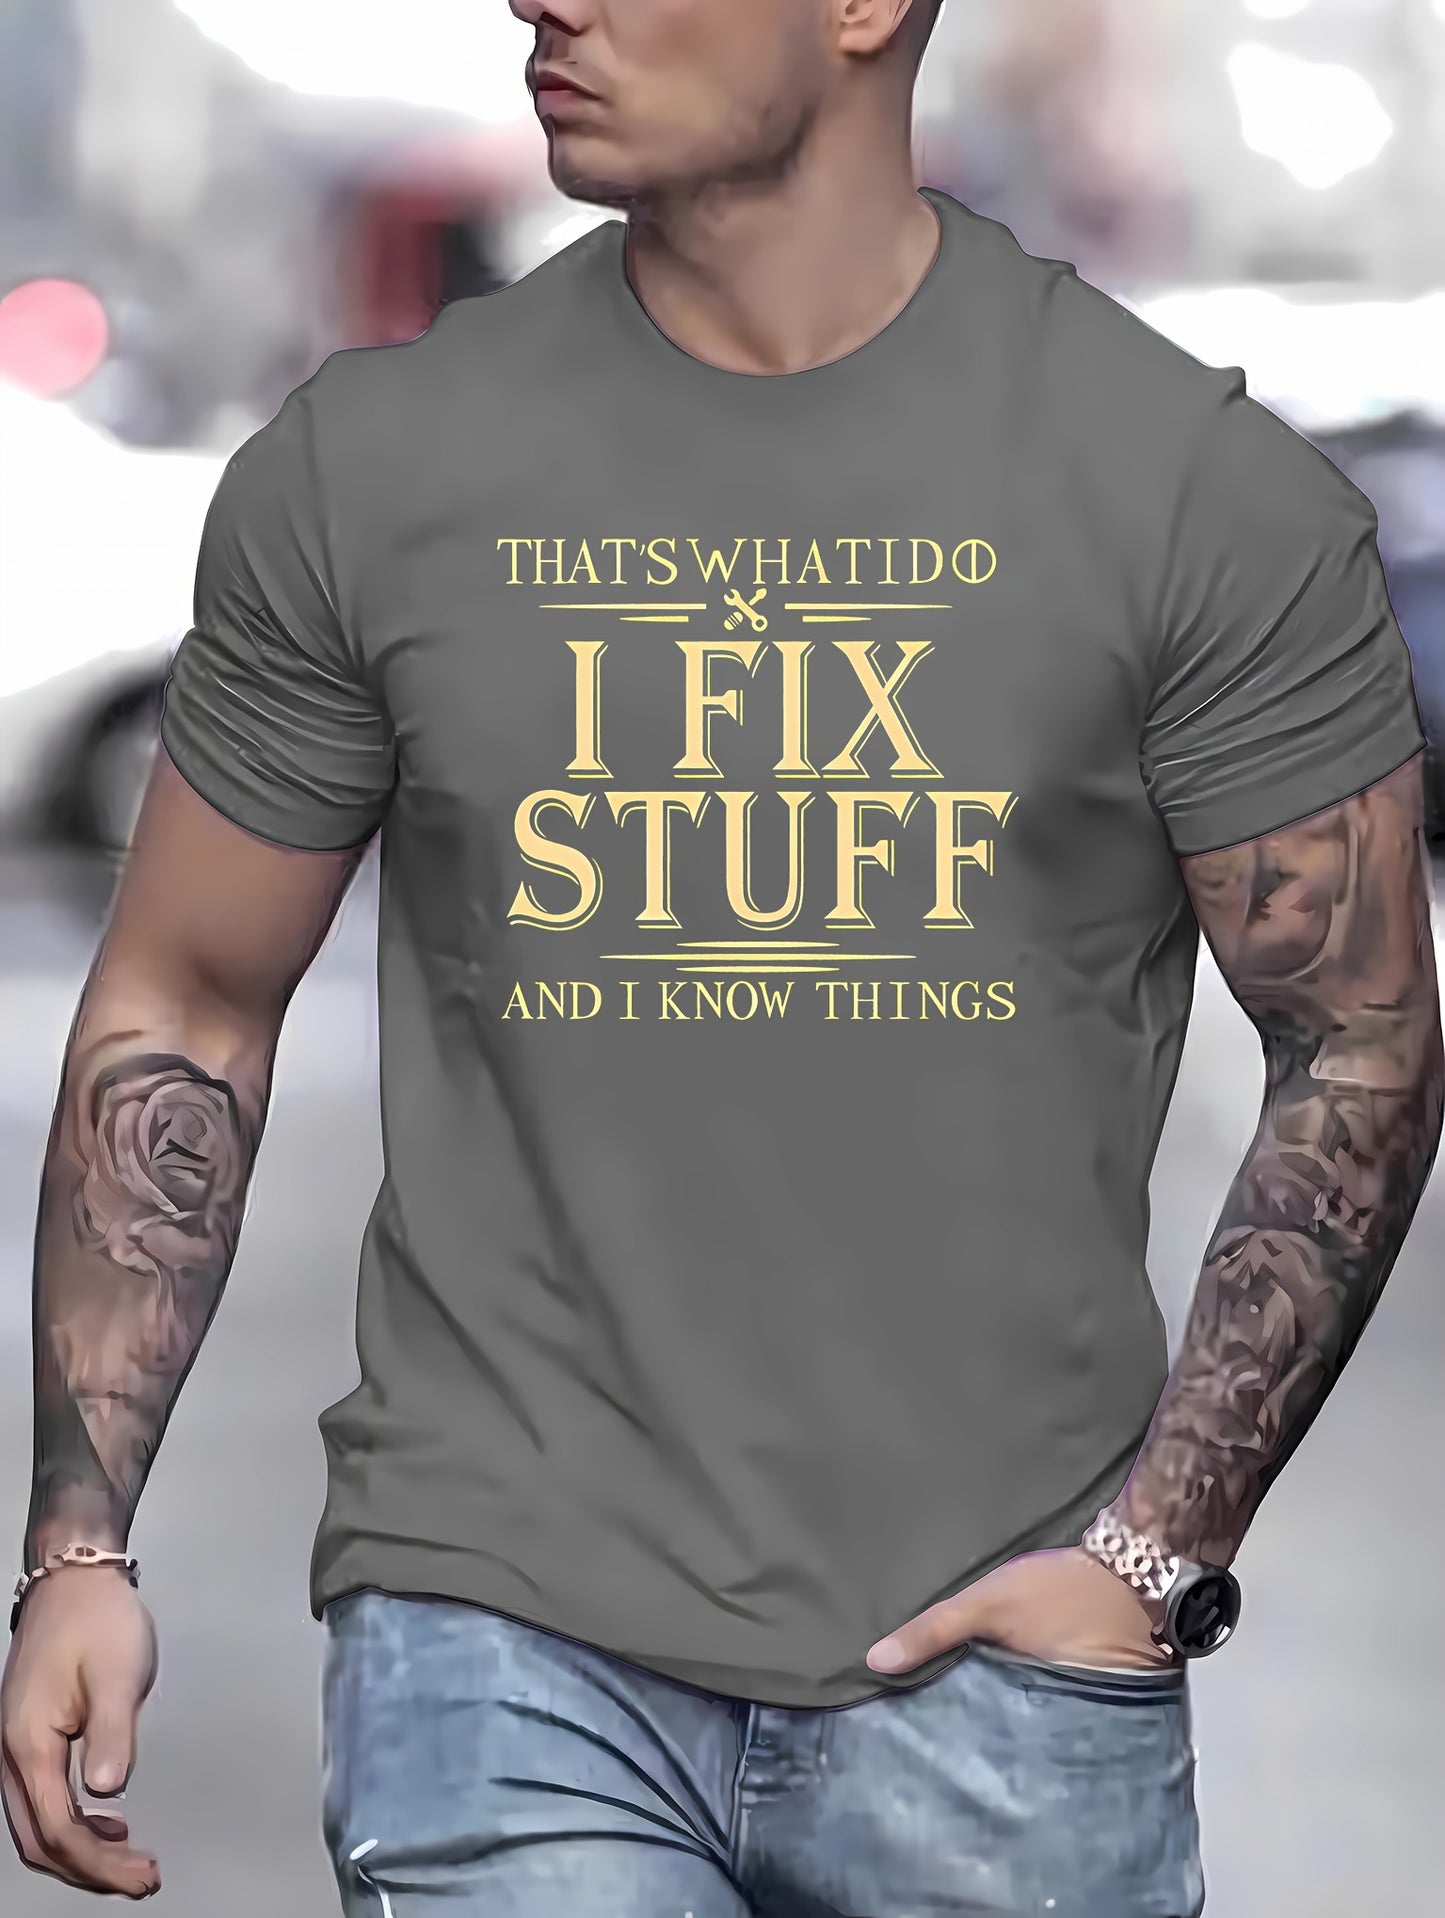 'I FIX STUFF' Round Neck Graphic T-shirts, Causal Tees, Short Sleeves Comfortable Tops, Men's Summer Clothing